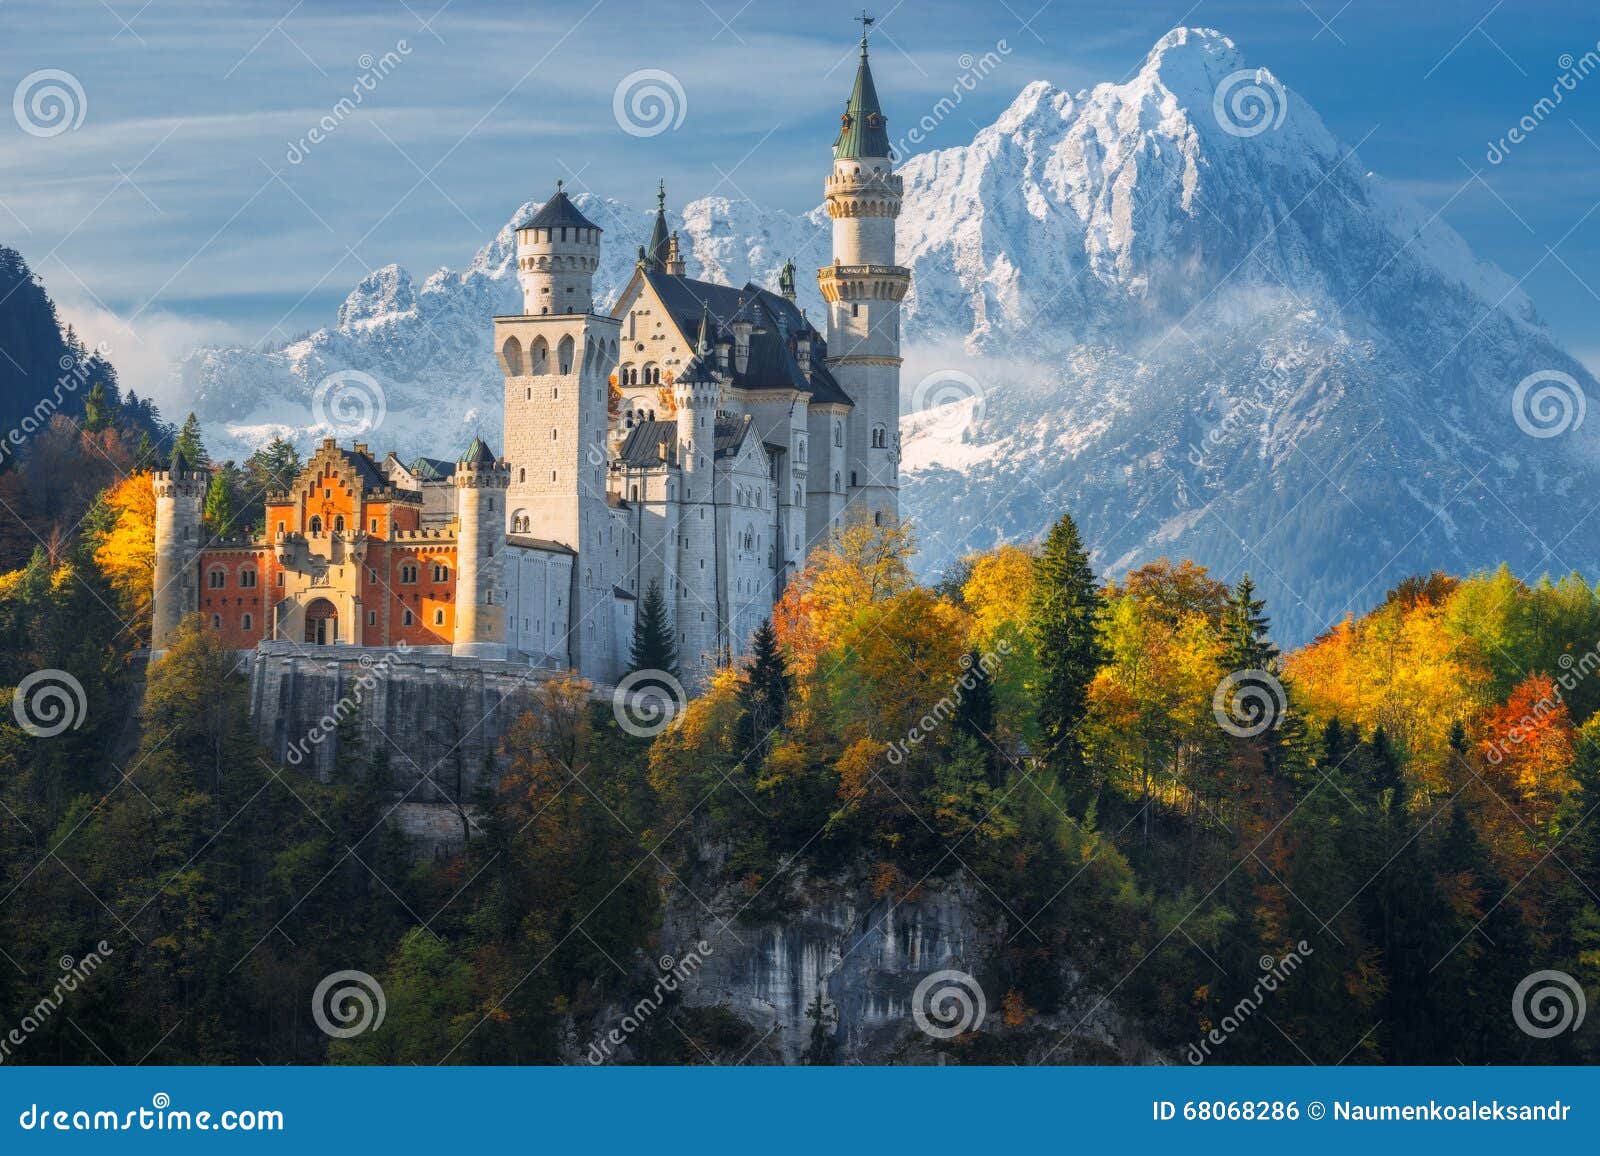 germany. famous neuschwanstein castle in the background of snowy mountains and trees with yellow and green leaves.